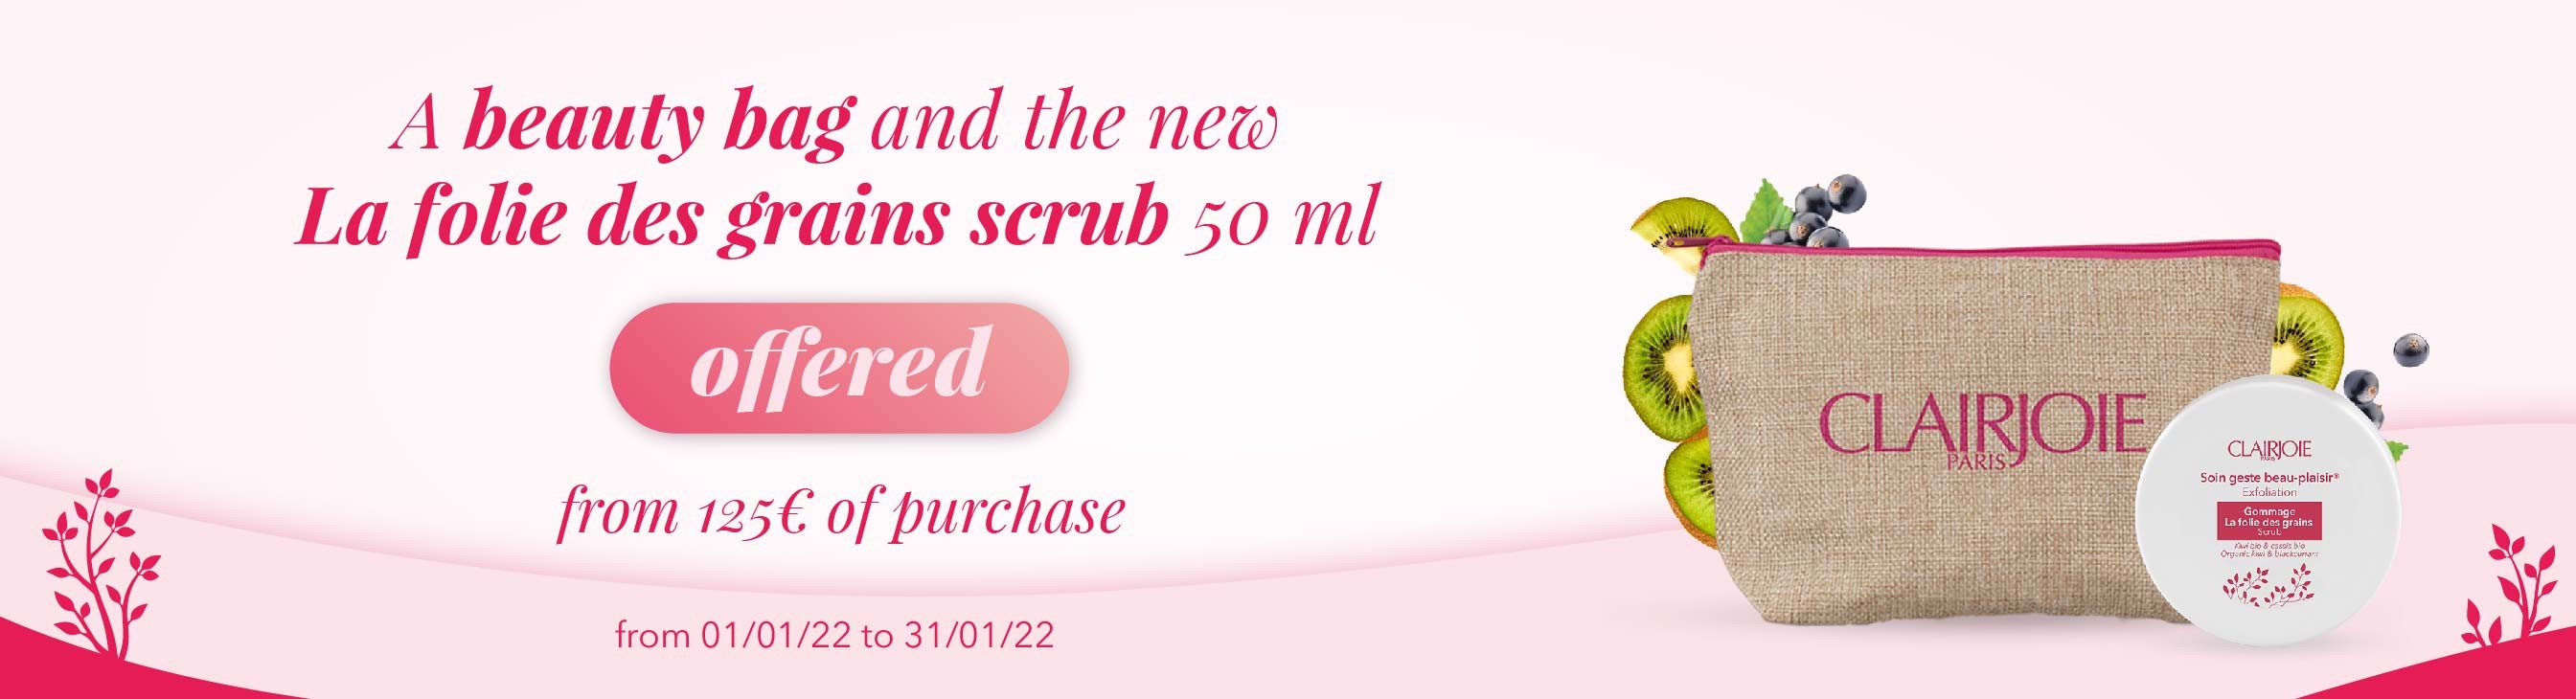 Client gift A beauty bag and the new La folie des grains Scrub from 125€ of purchase from 01/01/22 to 31/01/22